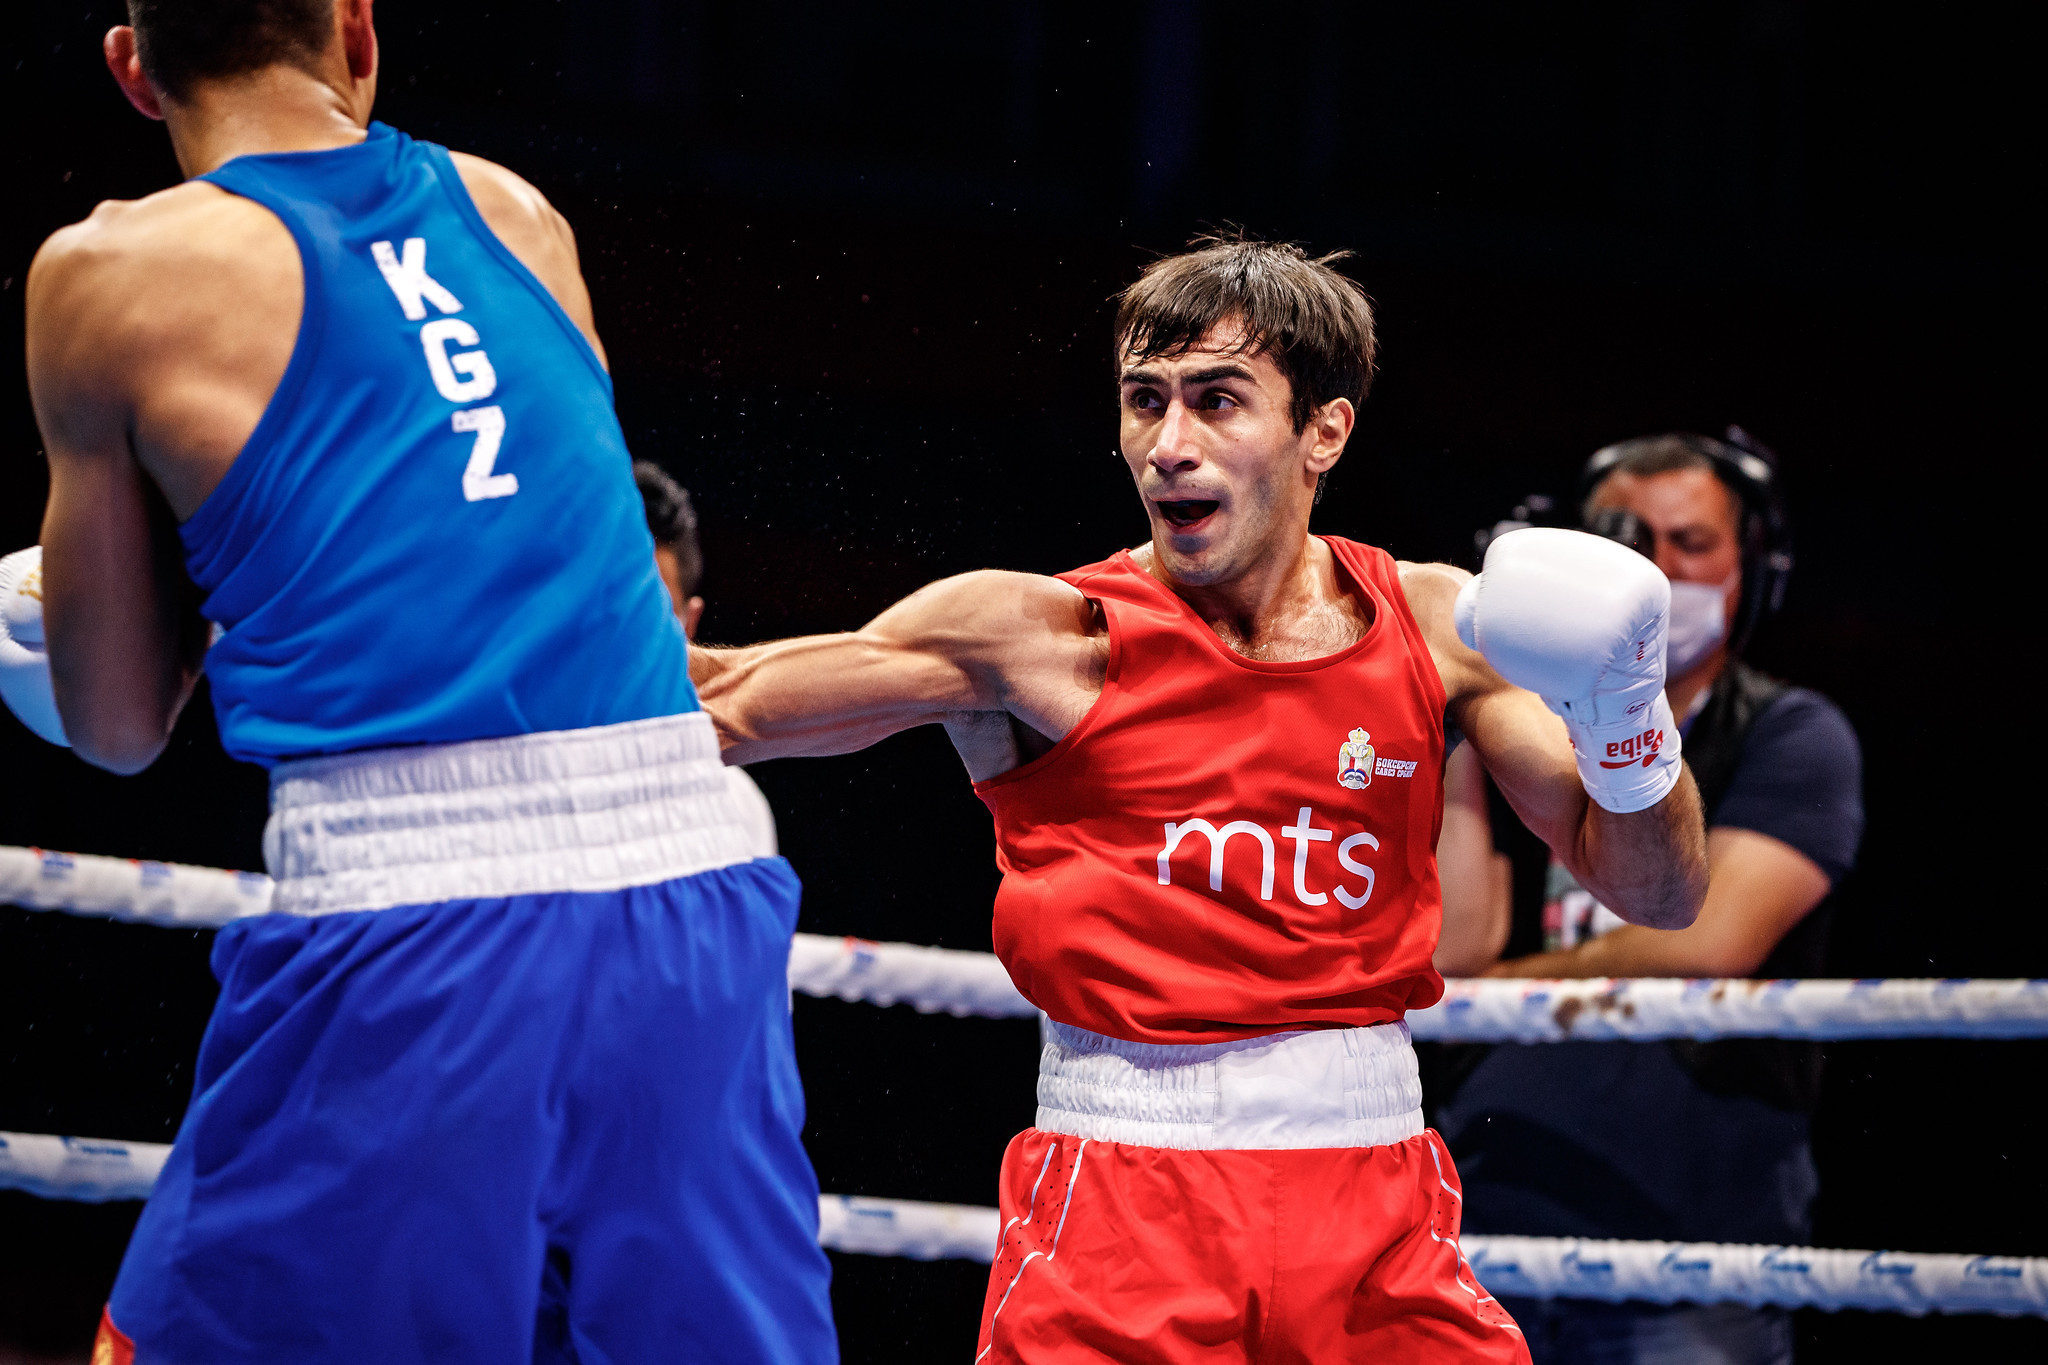 Quarter-finalists determined on day eight of AIBA Men's World Boxing Championships